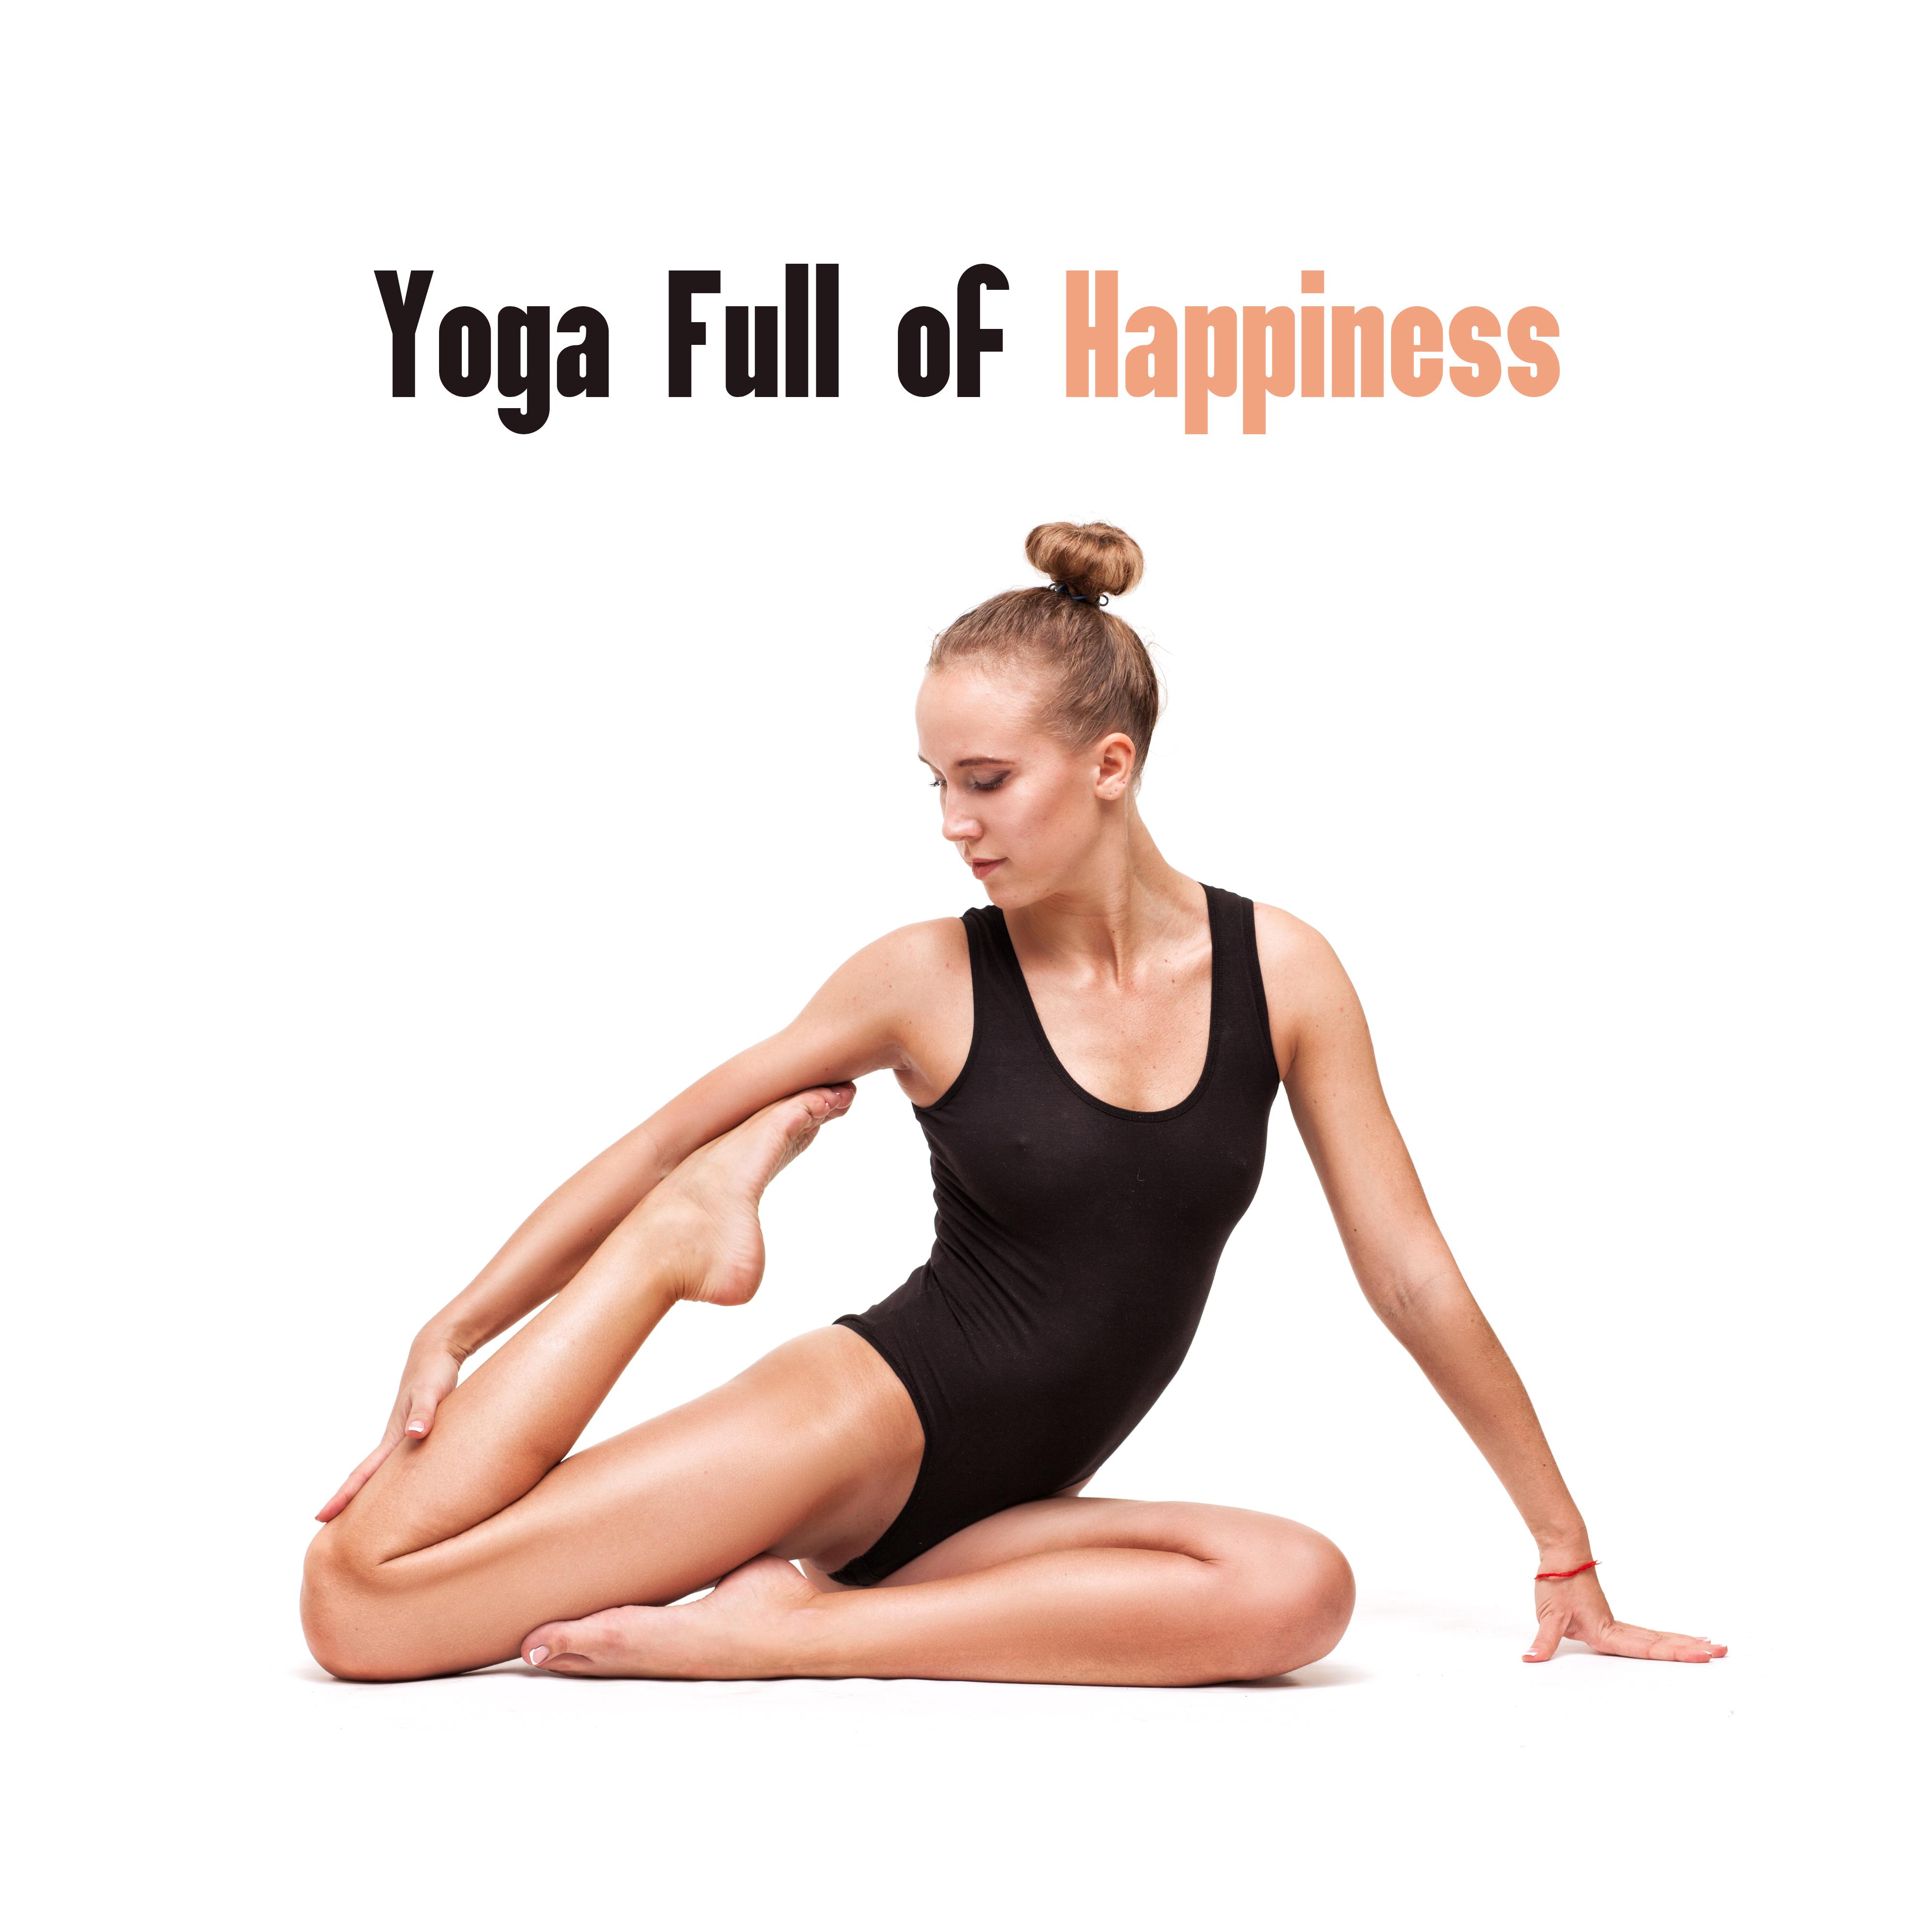 Yoga Full of Happiness: 2019 New Age Music for Positive Meditation & Relaxation, Fight with Bad Mood with Yoga, Relax Your Body & Mind